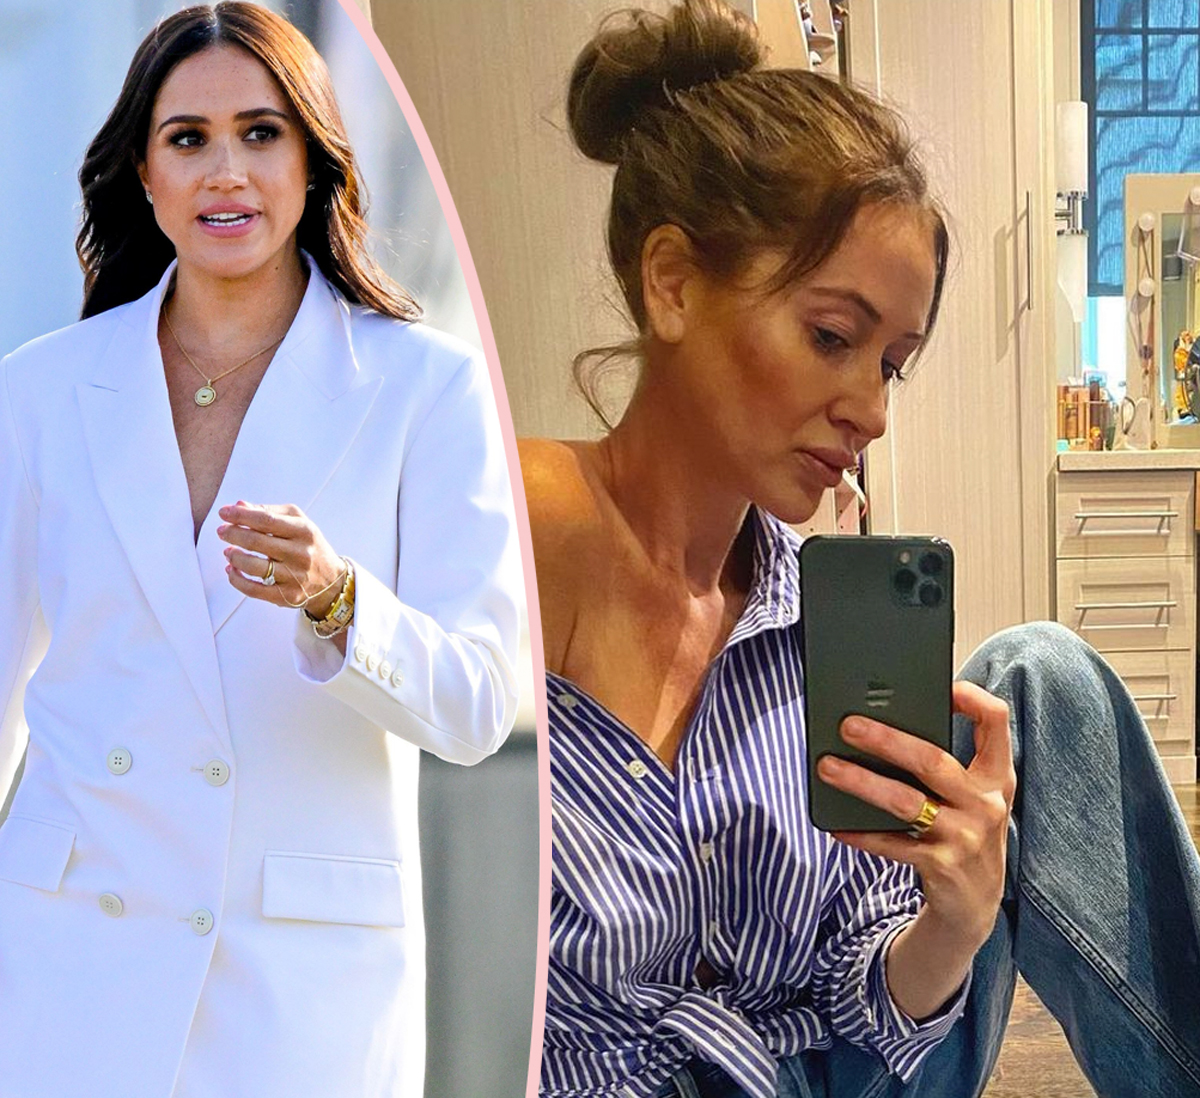 #Meghan Markle’s Problematic Ex-BFF Jessica Mulroney Posts Cryptic Quote After Being Left Out Of Docuseries!